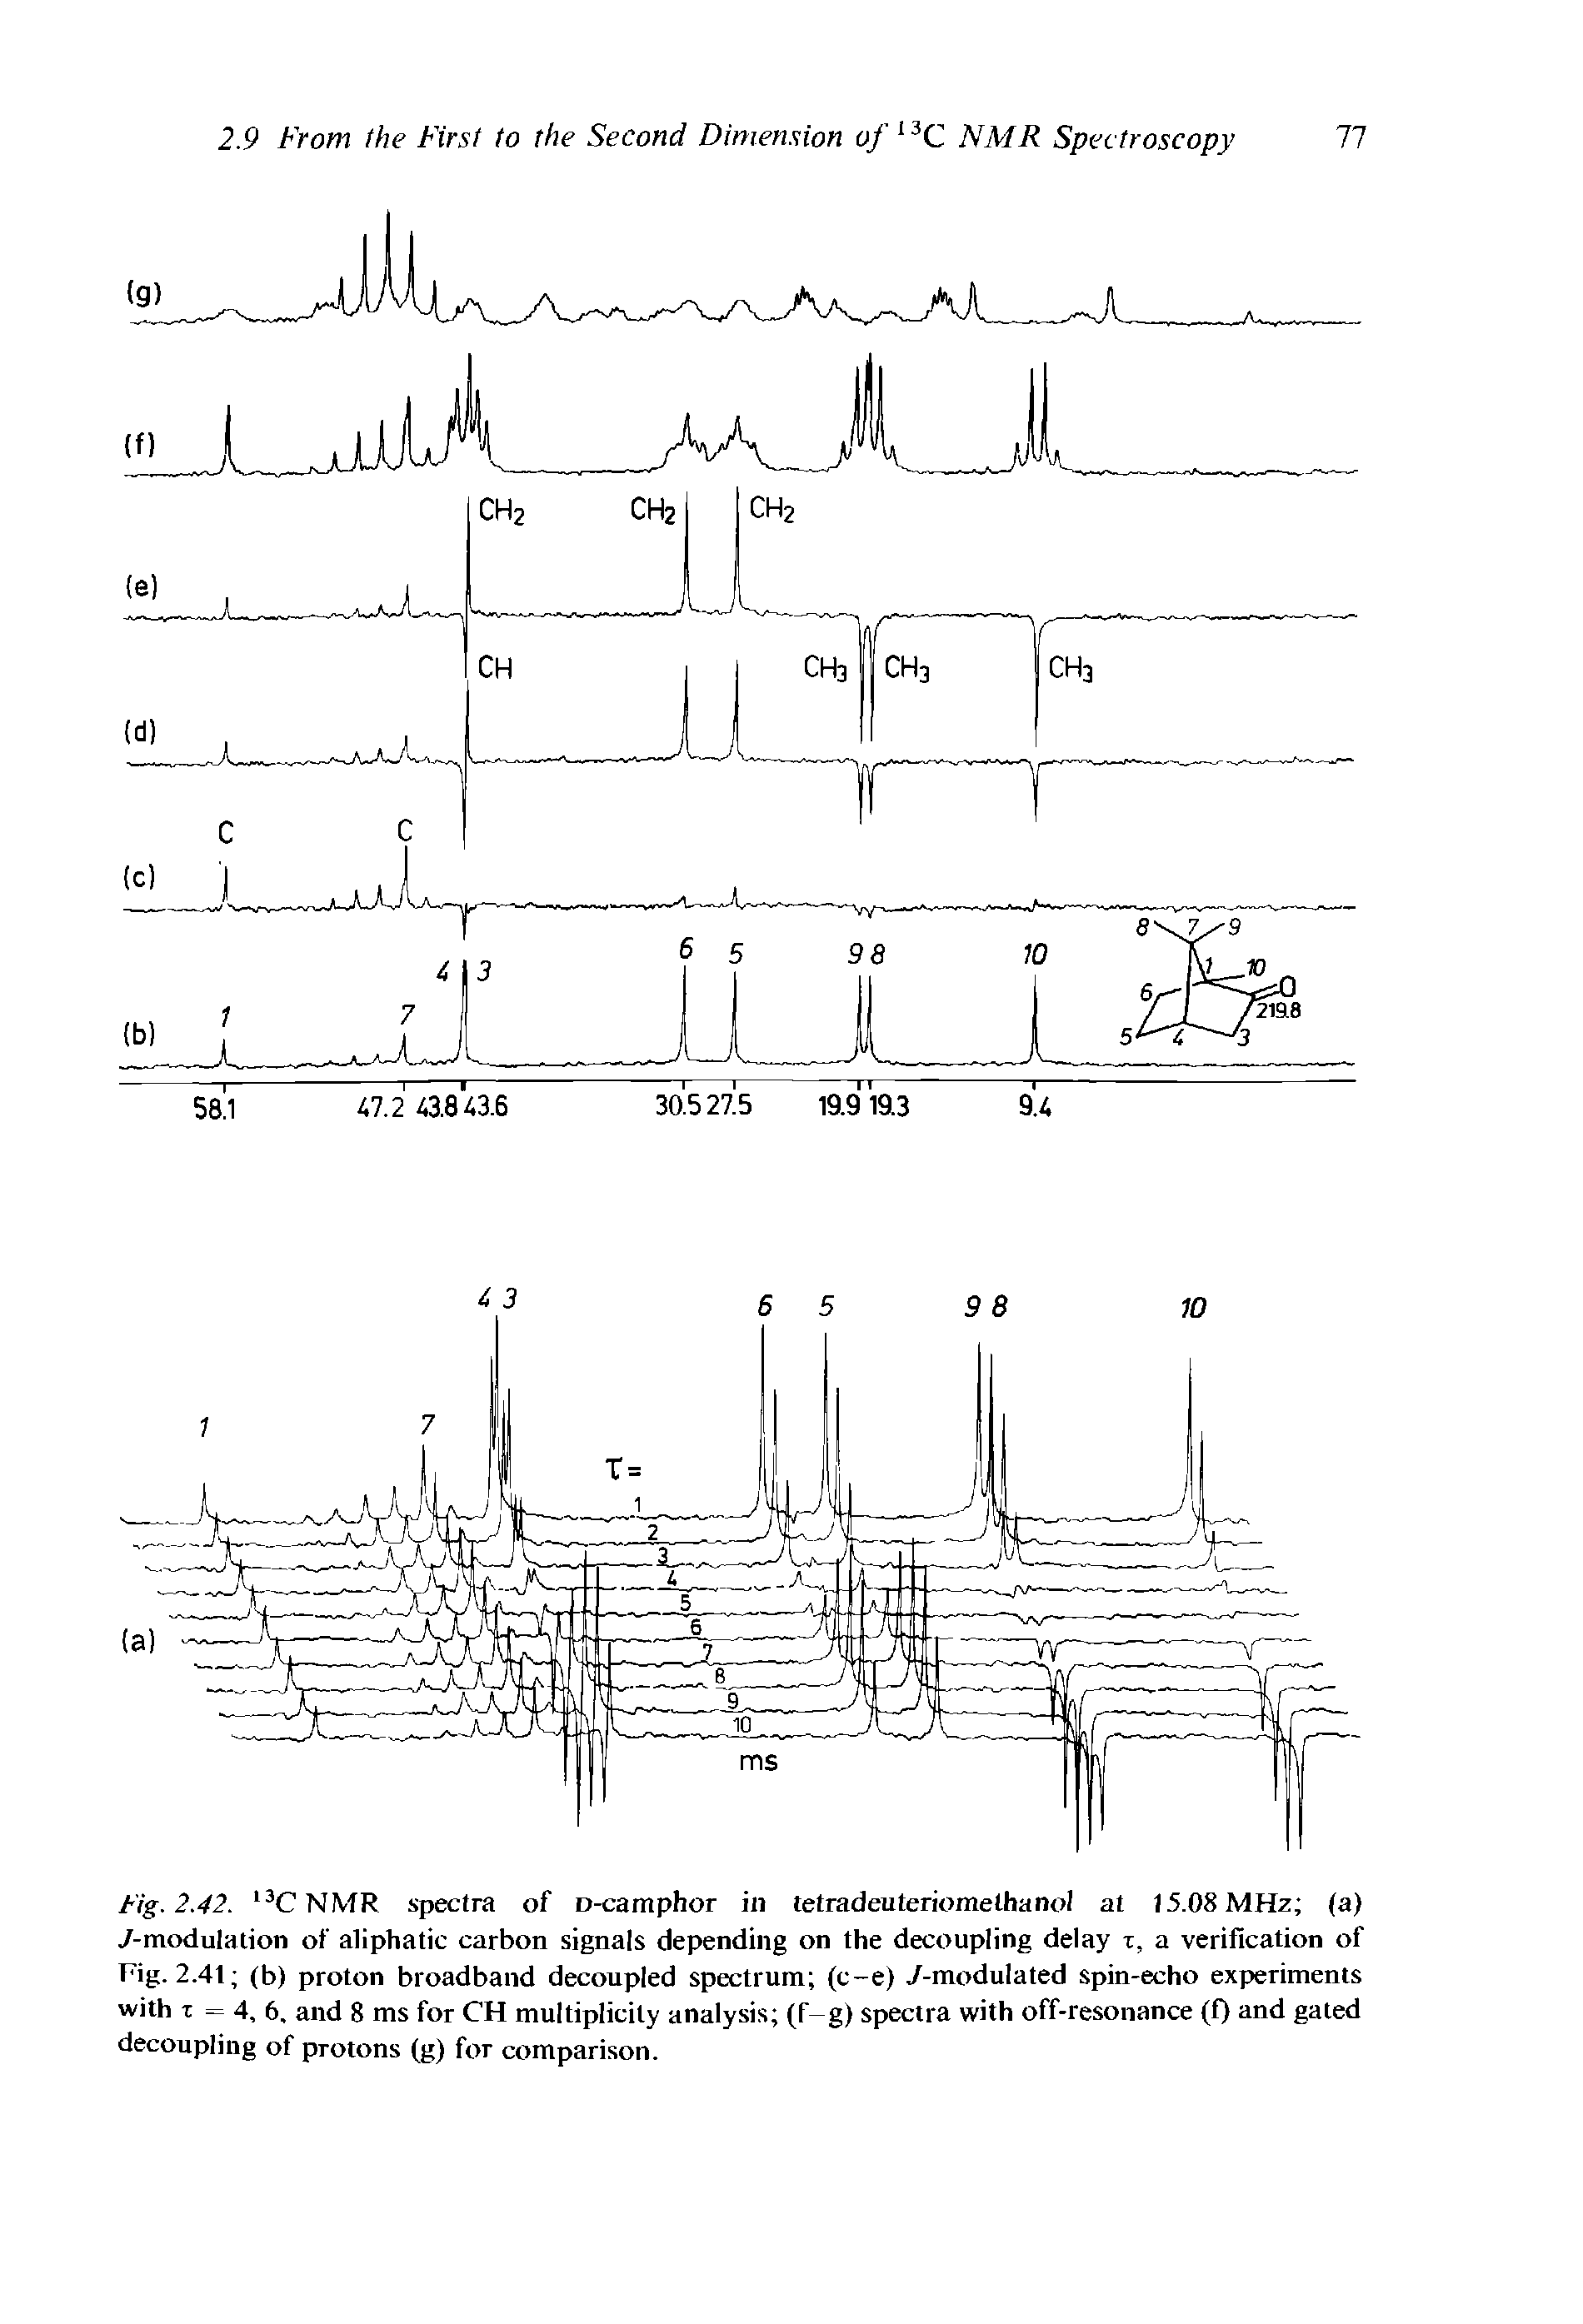 Fig. 2.42. I3C NMR spectra of D-camphor in tetradeuteriomelhanol at 15.08 MHz (a). /-modulation of aliphatic carbon signals depending on the decoupling delay z, a verification of Fig. 2.41 (b) proton broadband decoupled spectrum (c-e). /-modulated spin-echo experiments with z = 4, 6, and 8 ms for CH multiplicity analysis (f-g) spectra with off-resonance (0 and gated decoupling of protons (g) for comparison.